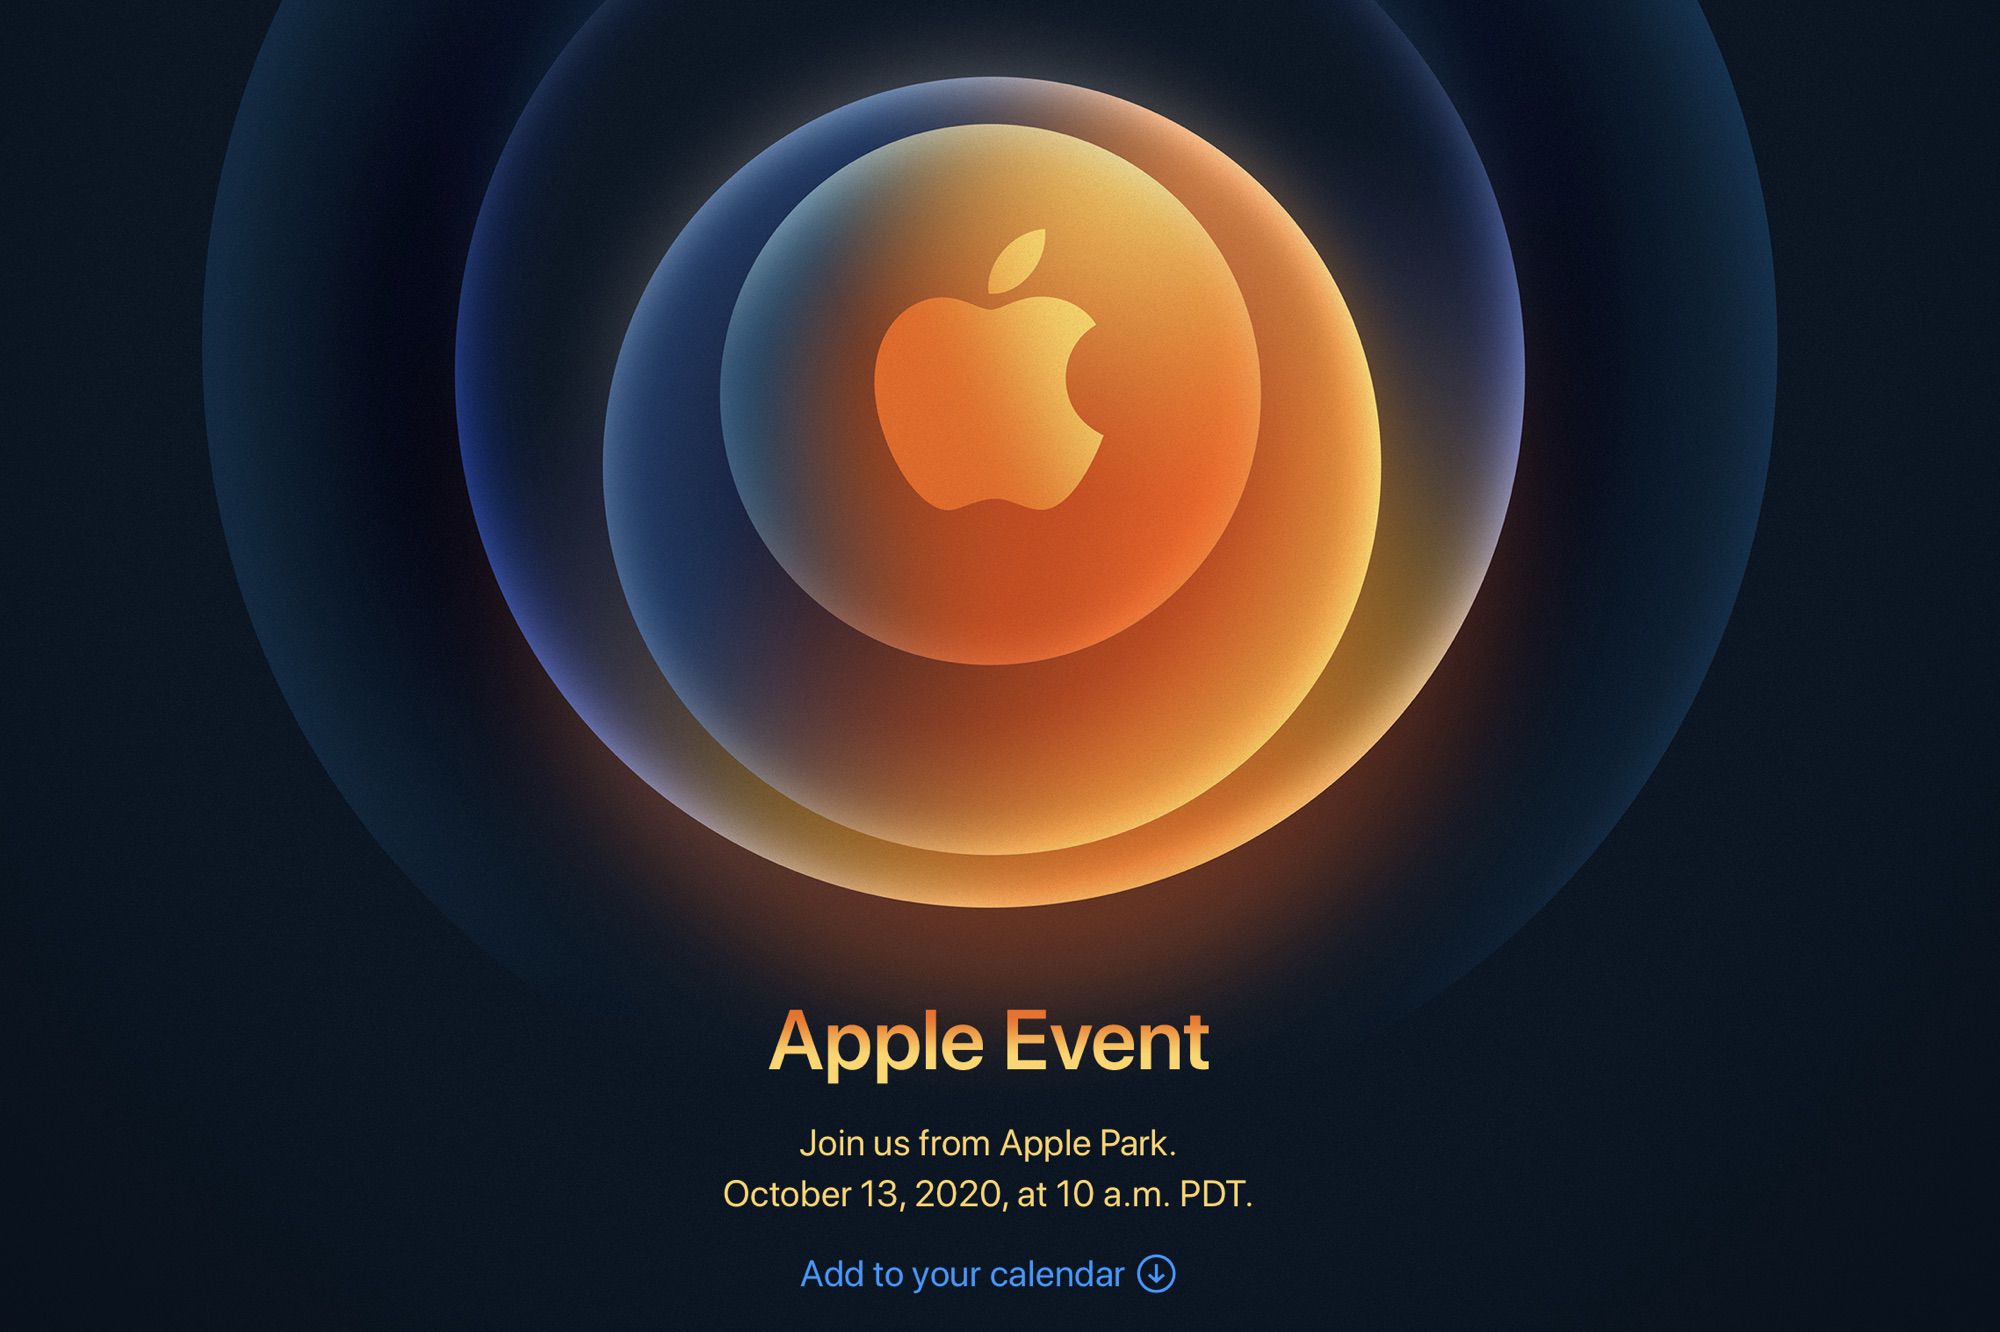 How to Watch Apple's iPhone 12 Event on October 13, 2020 MacRumors